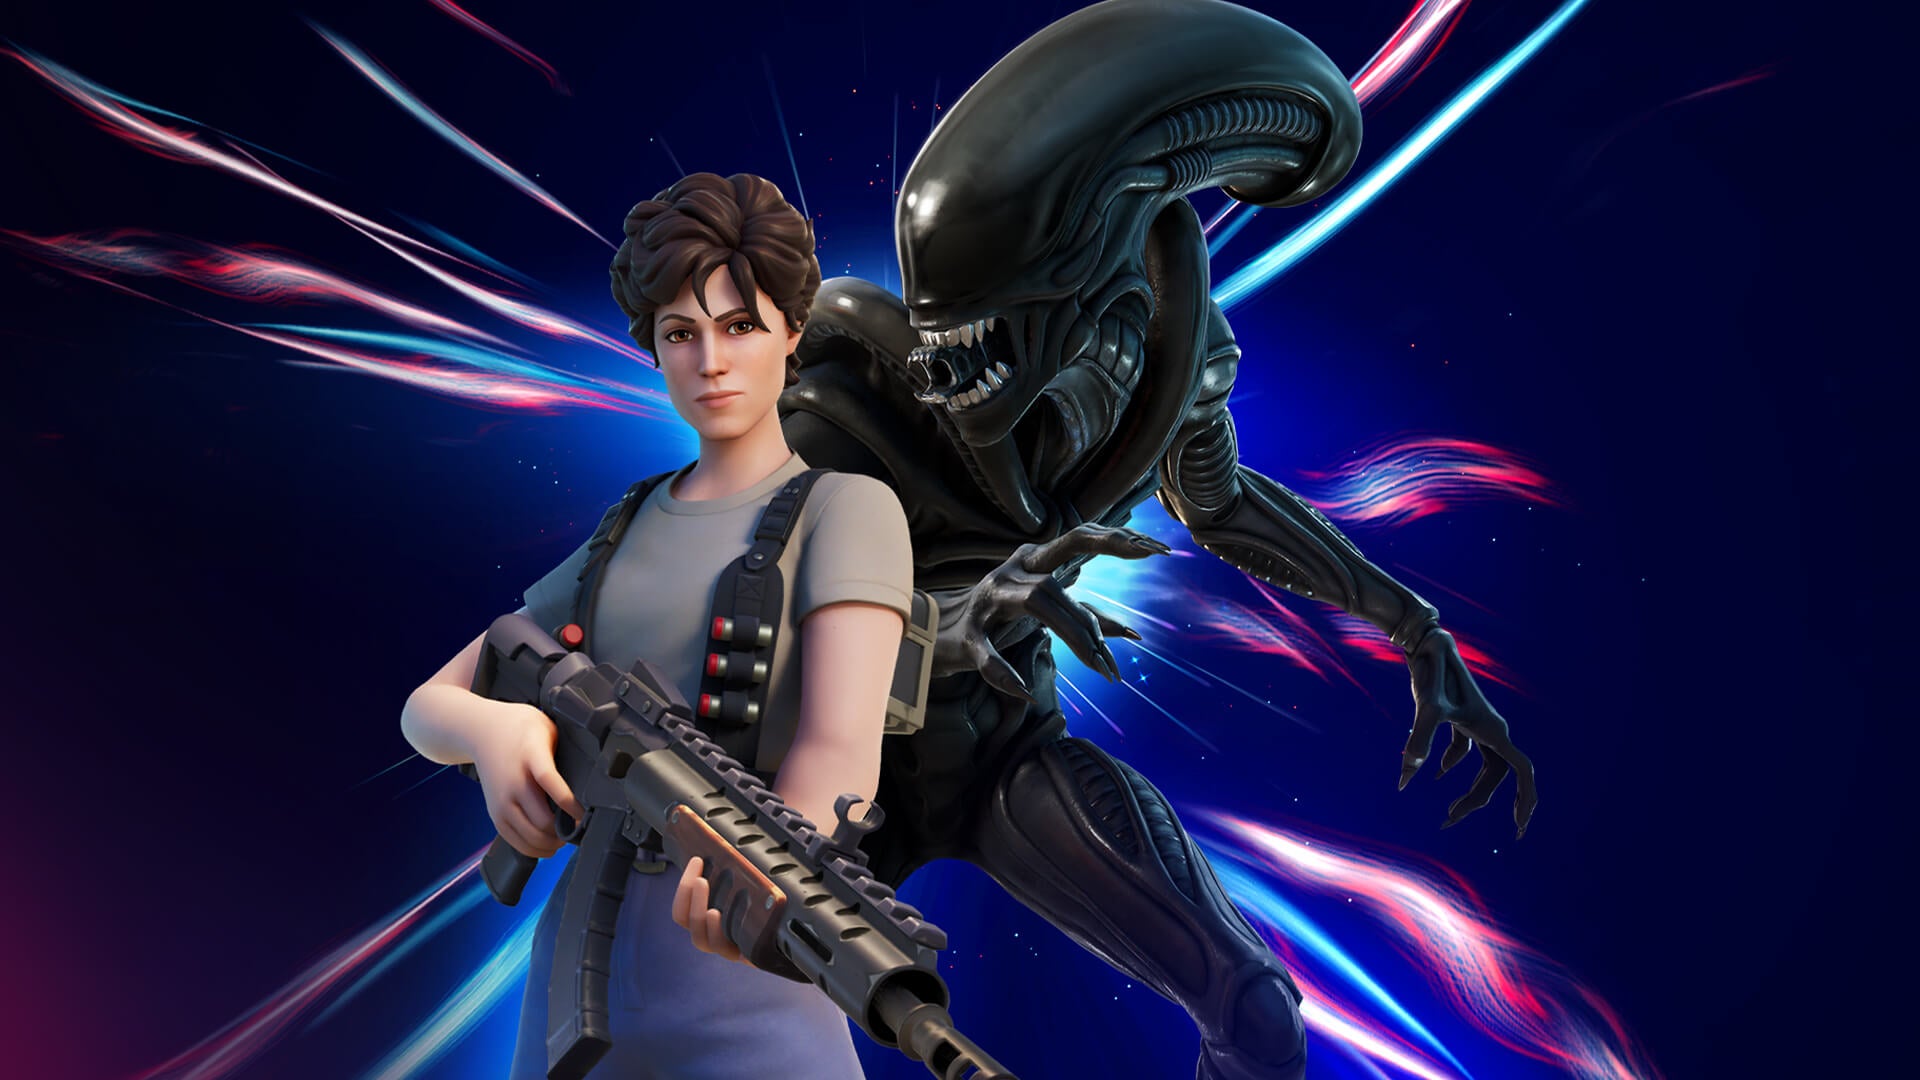 Image for Fortnite adds Ripley and the Xenomorph from the Alien franchise